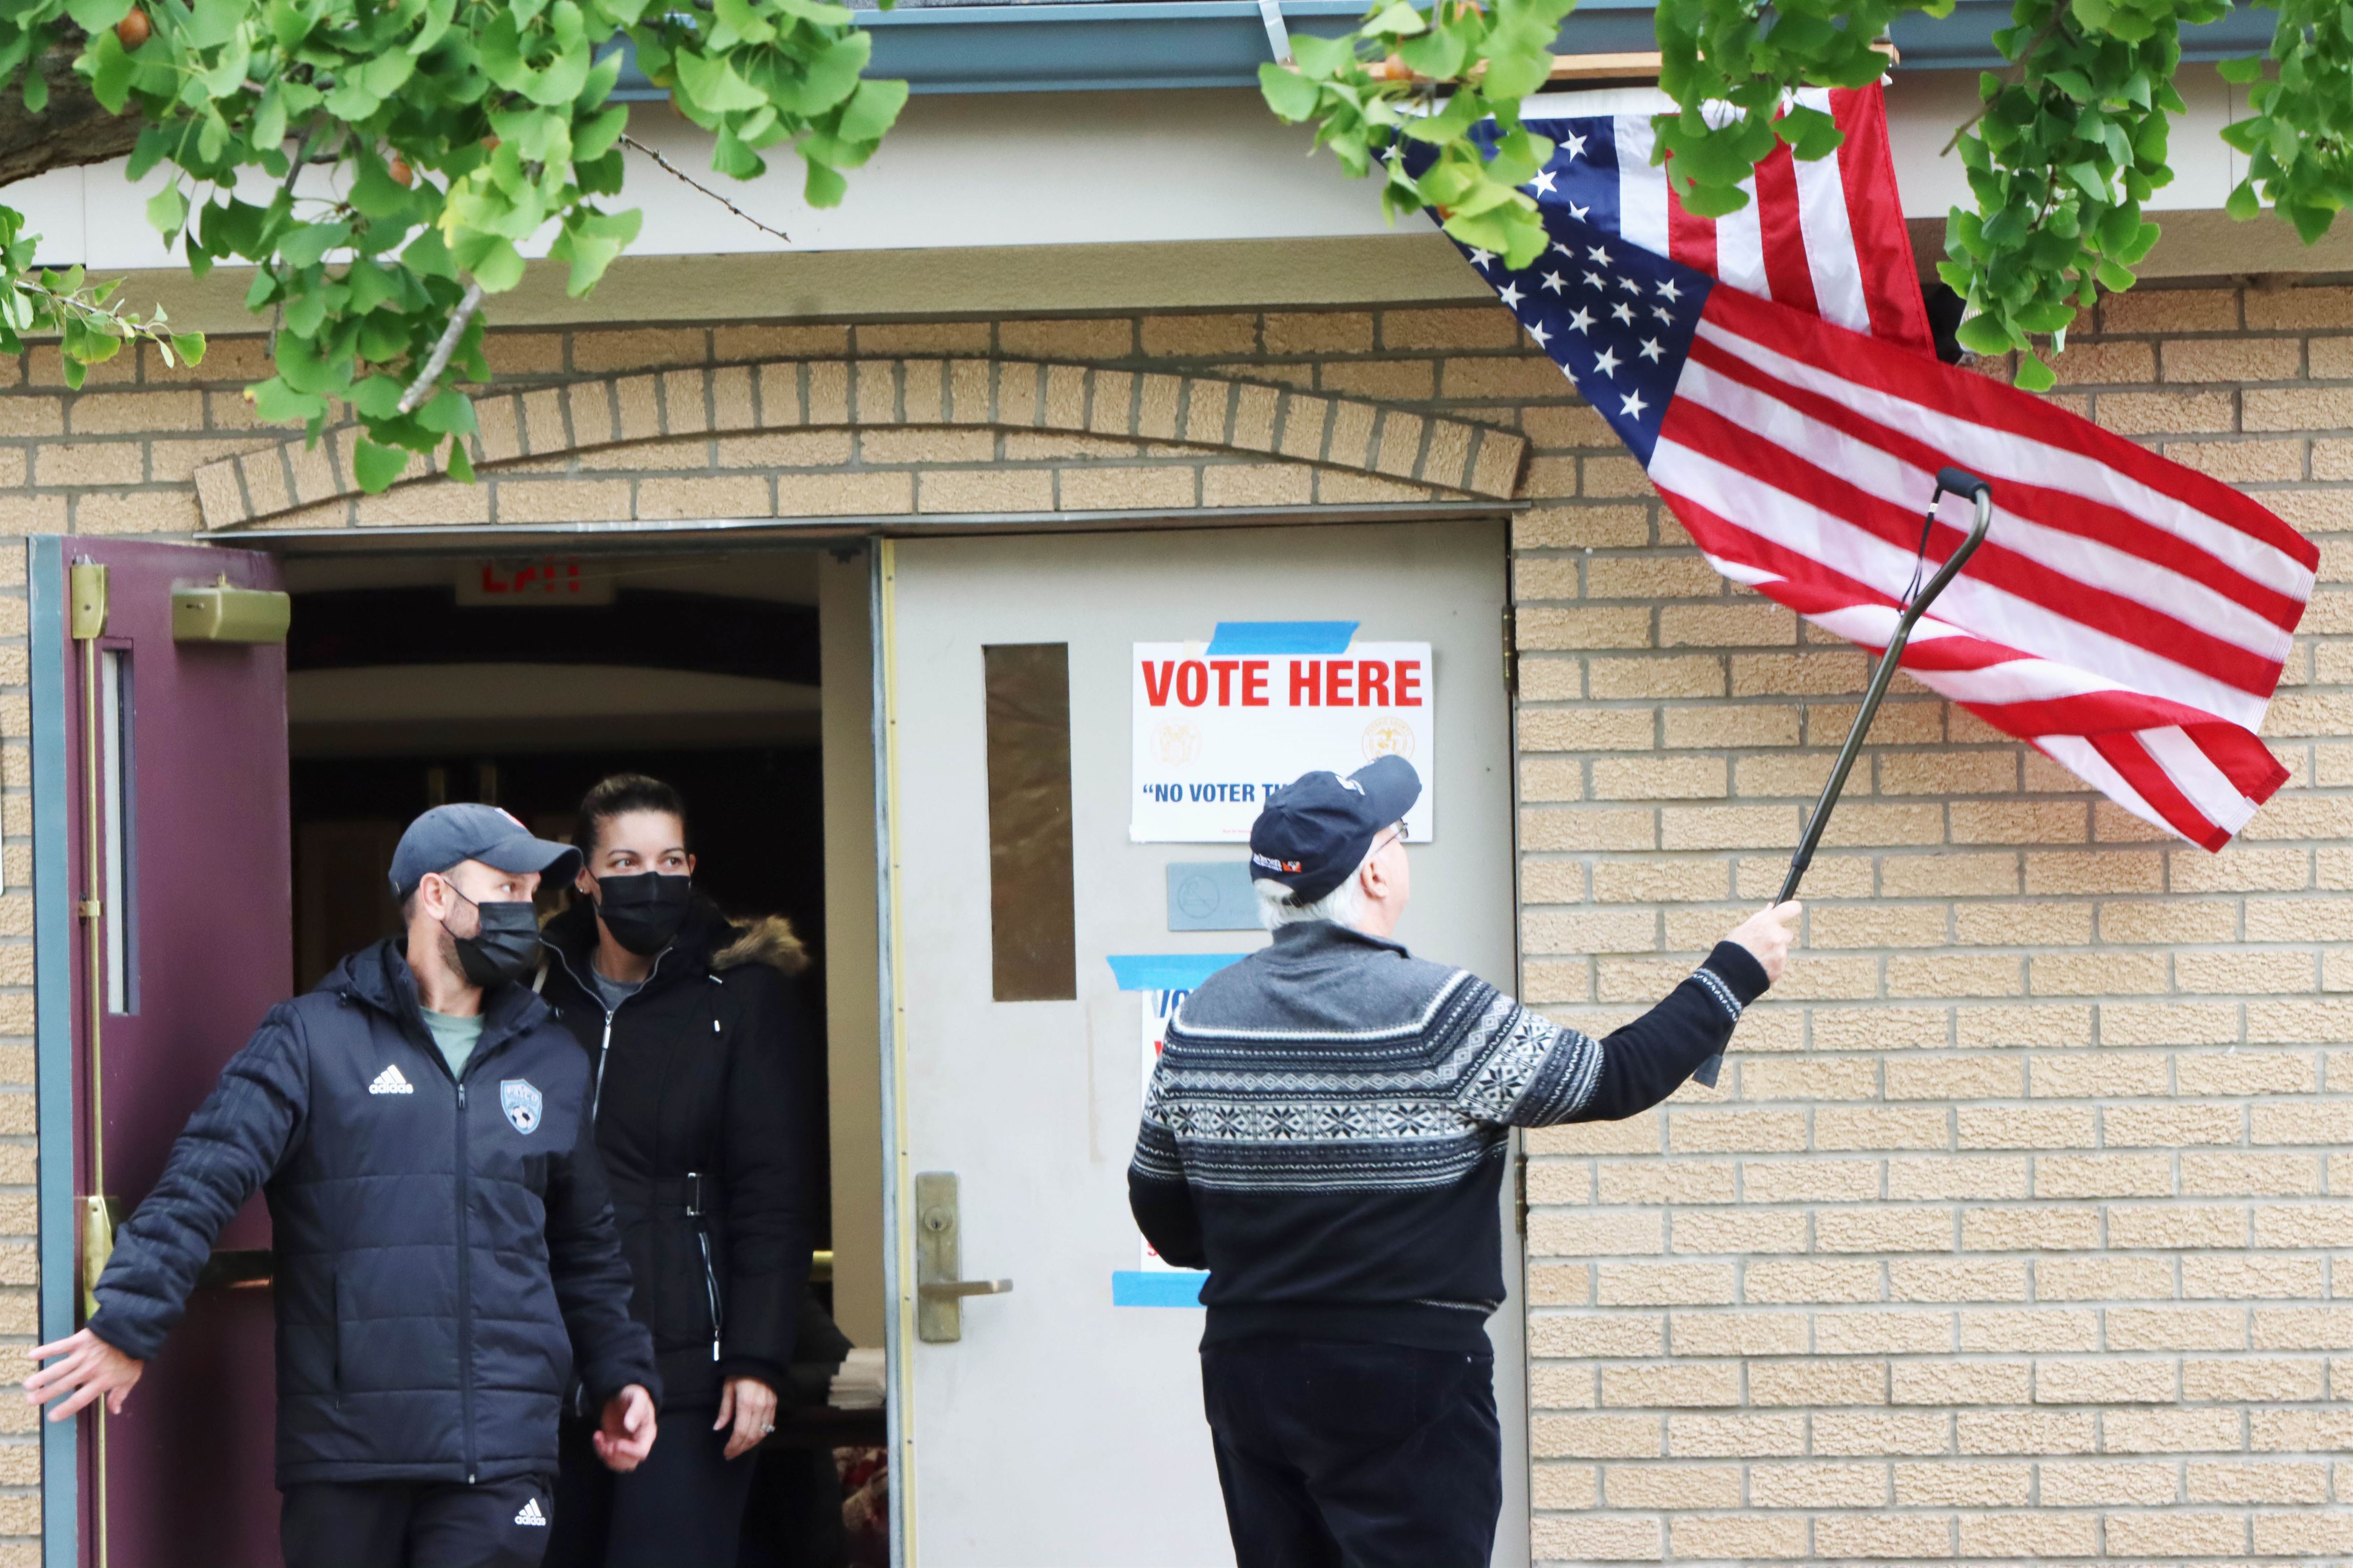 Edward Bonner (right) from Wanaque, New Jersey fixing the flag with his cane outside the Wayne Public Library where voting is taking place. Photo Courtesy of Dylan Rottkamp